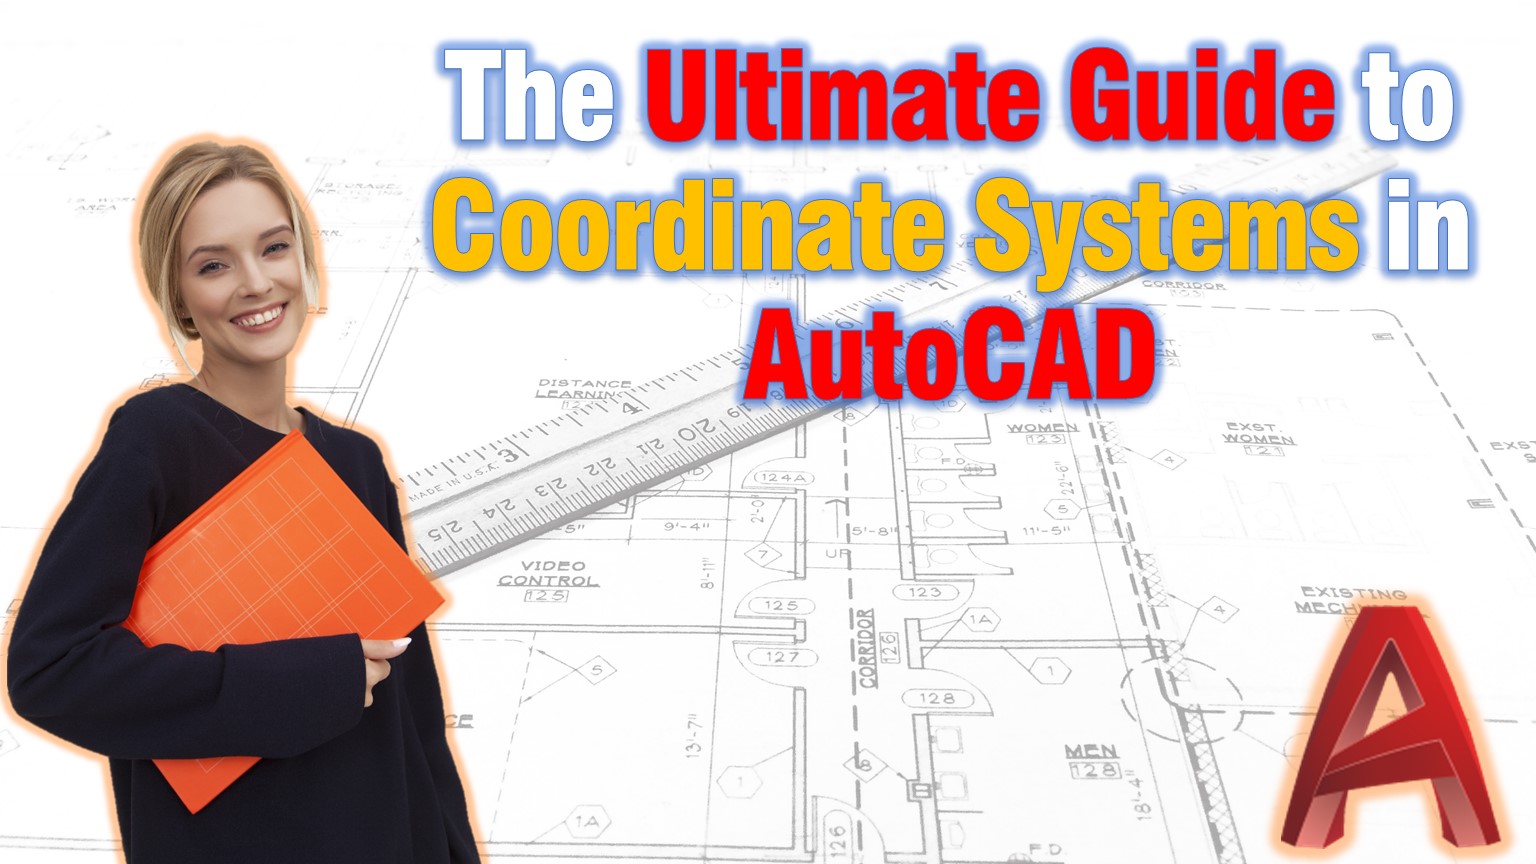 Learn how to use Coordinate systems in AutoCAD with our Ultimate guide!